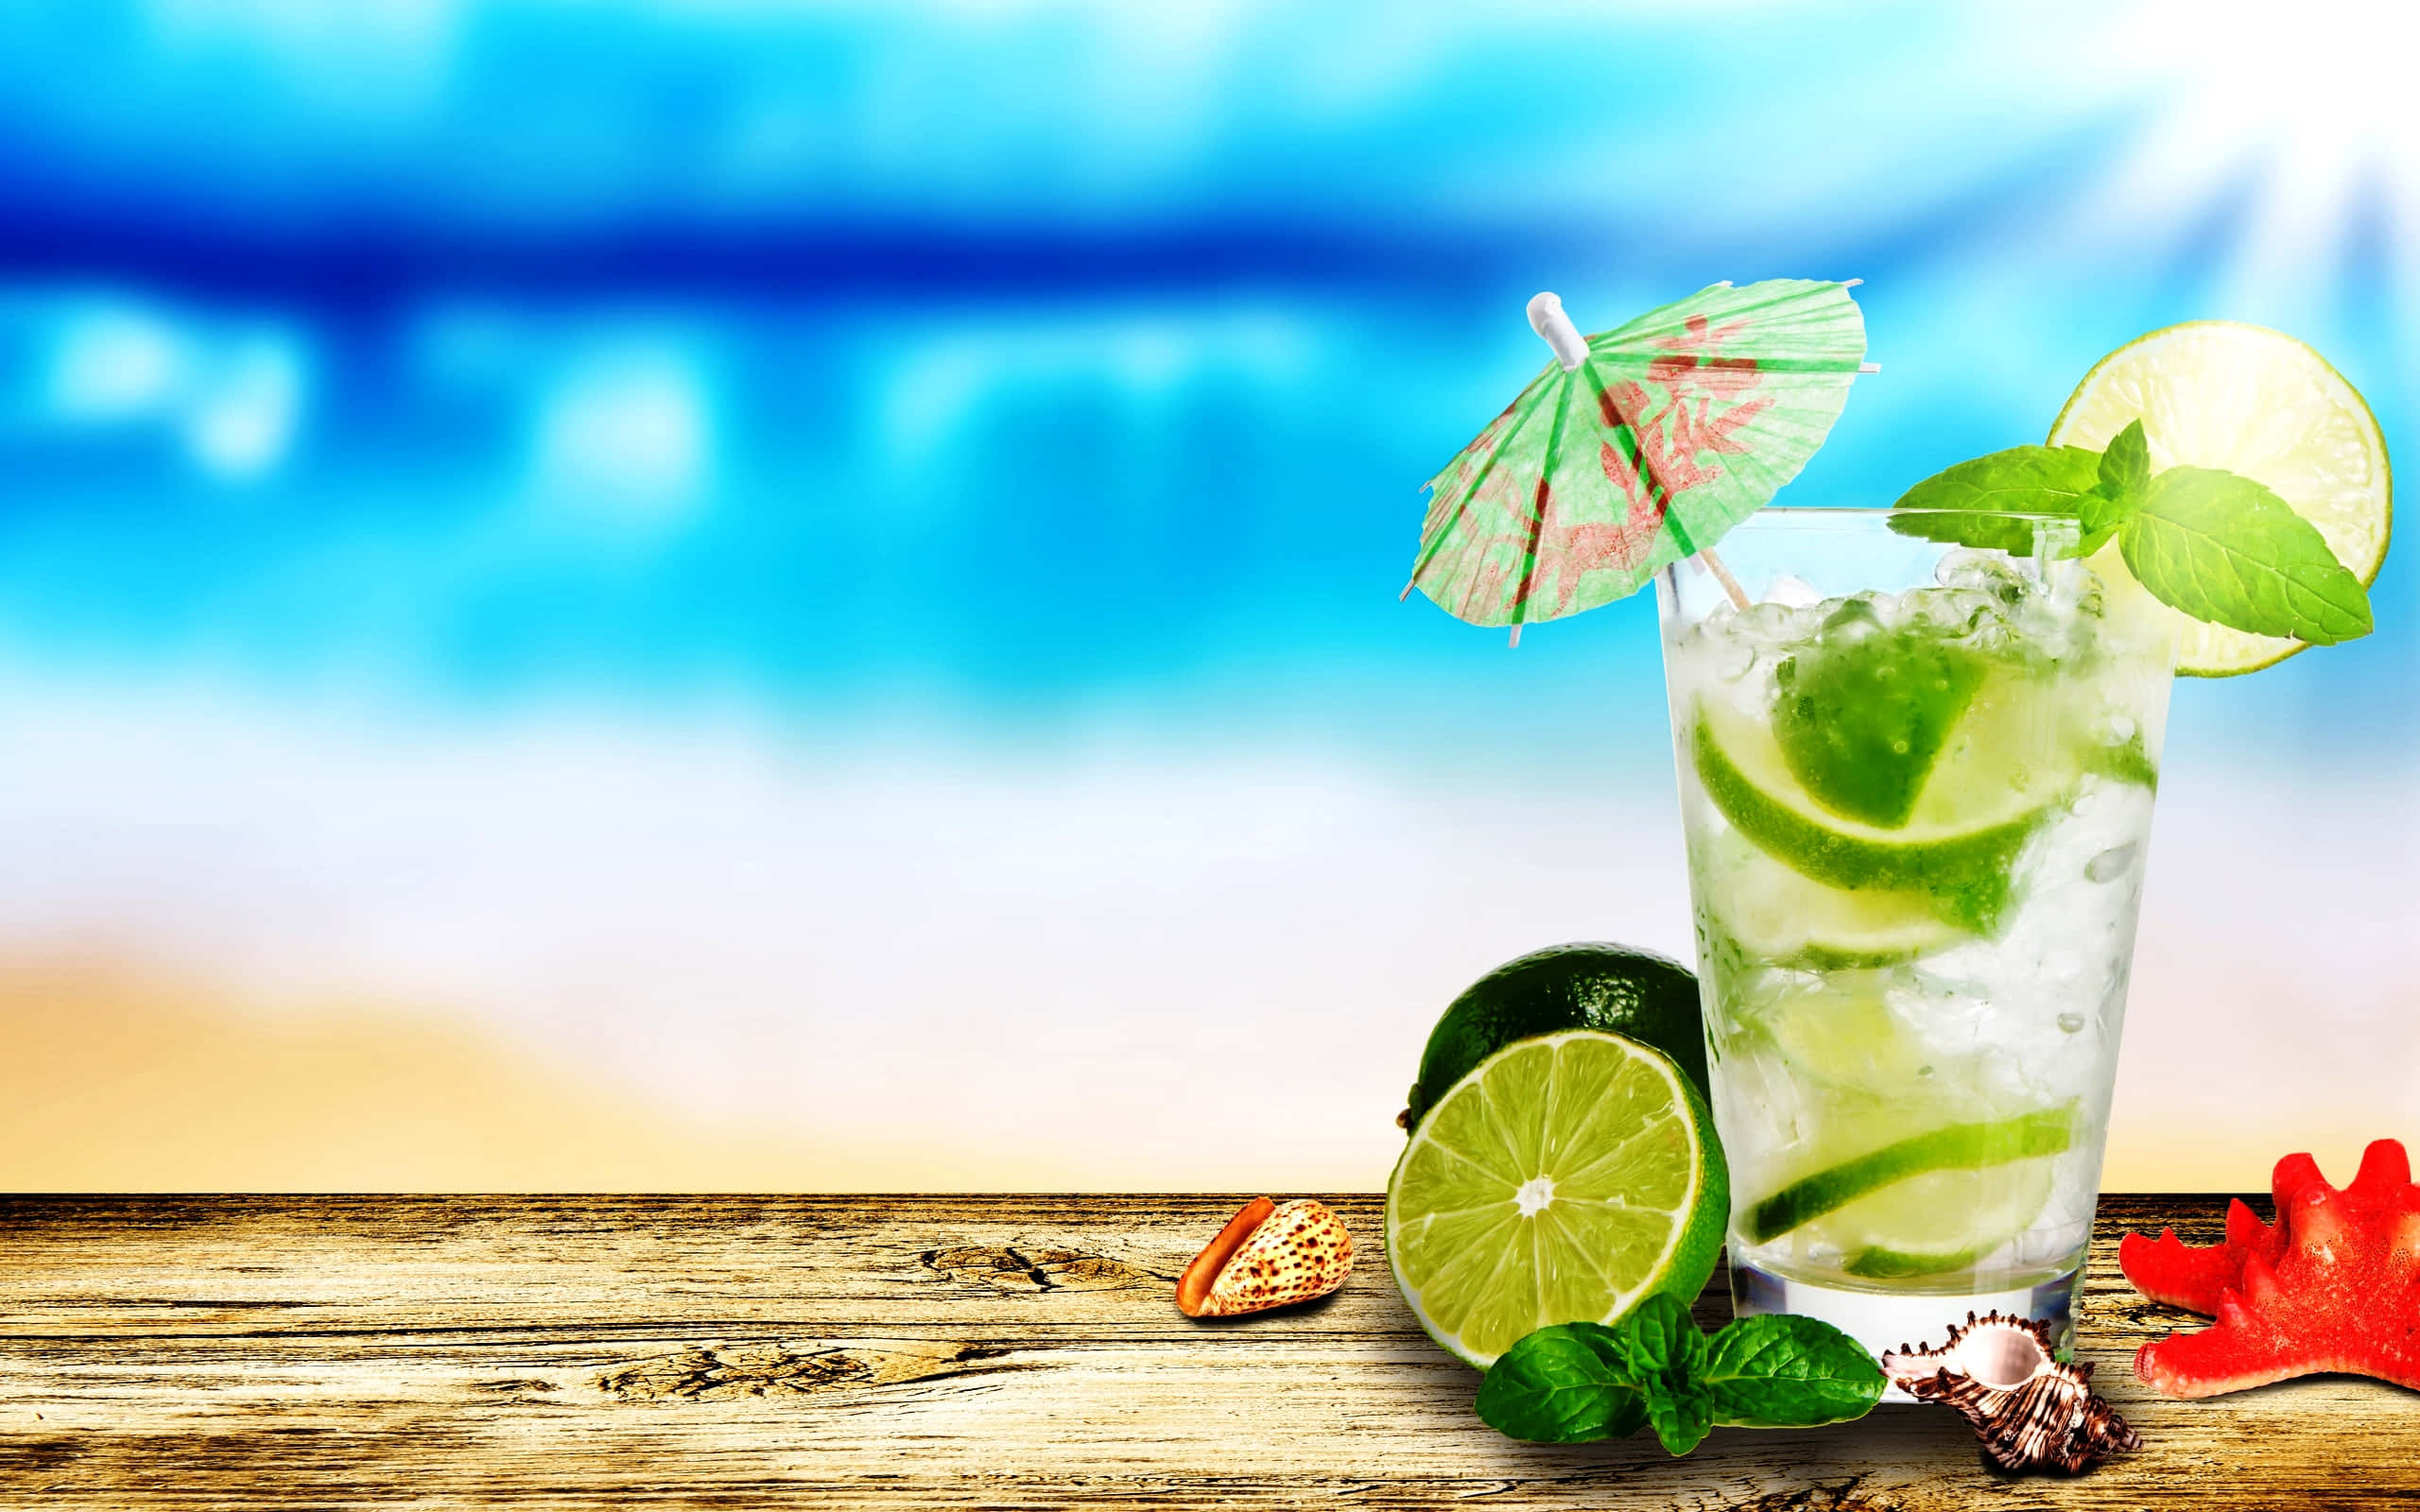 Summer Cocktail Screen Saver Picture